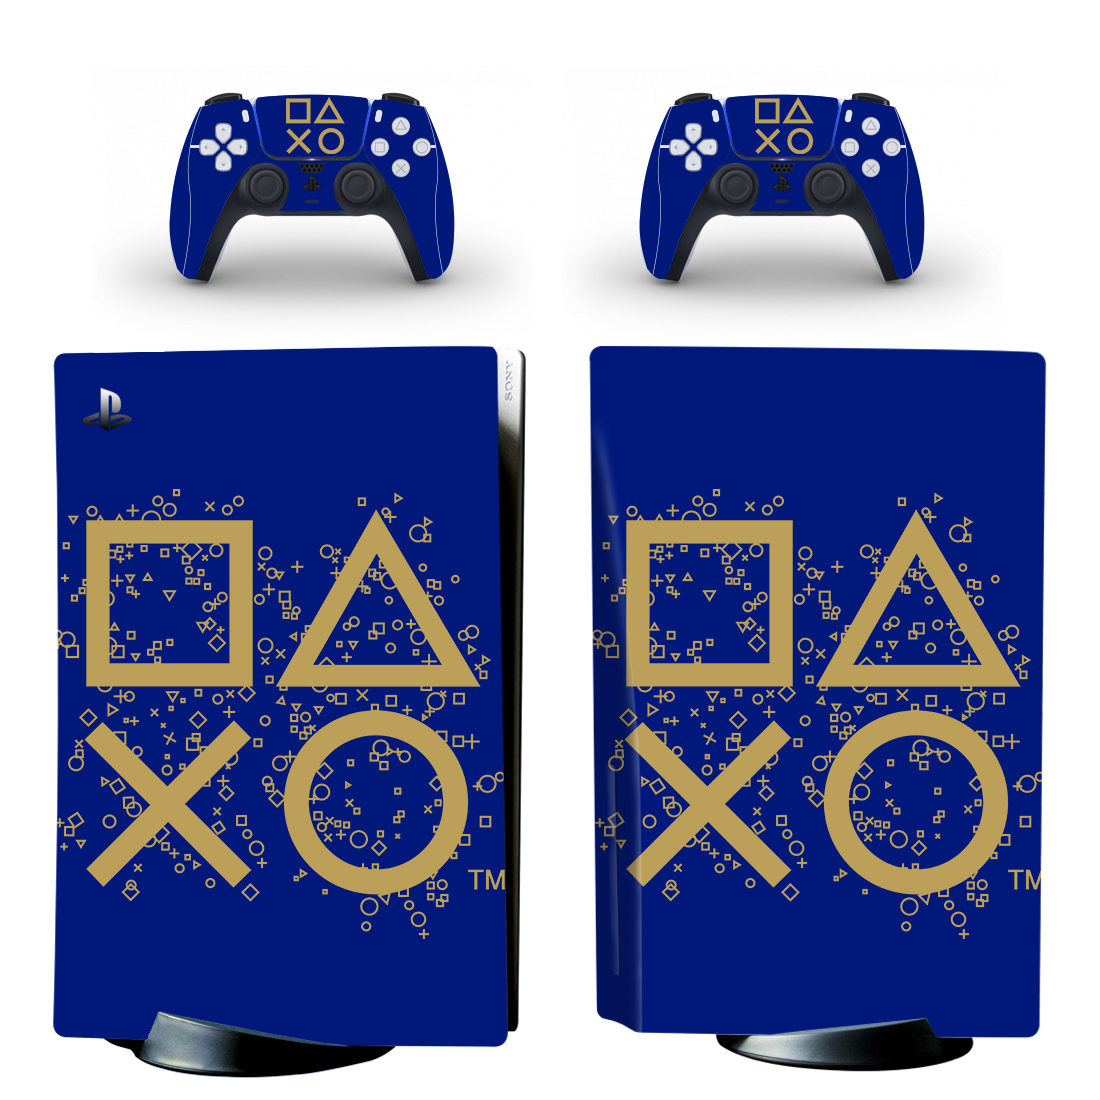 Golden Playstation Symbols On Blue PS5 Skin Sticker And Controllers